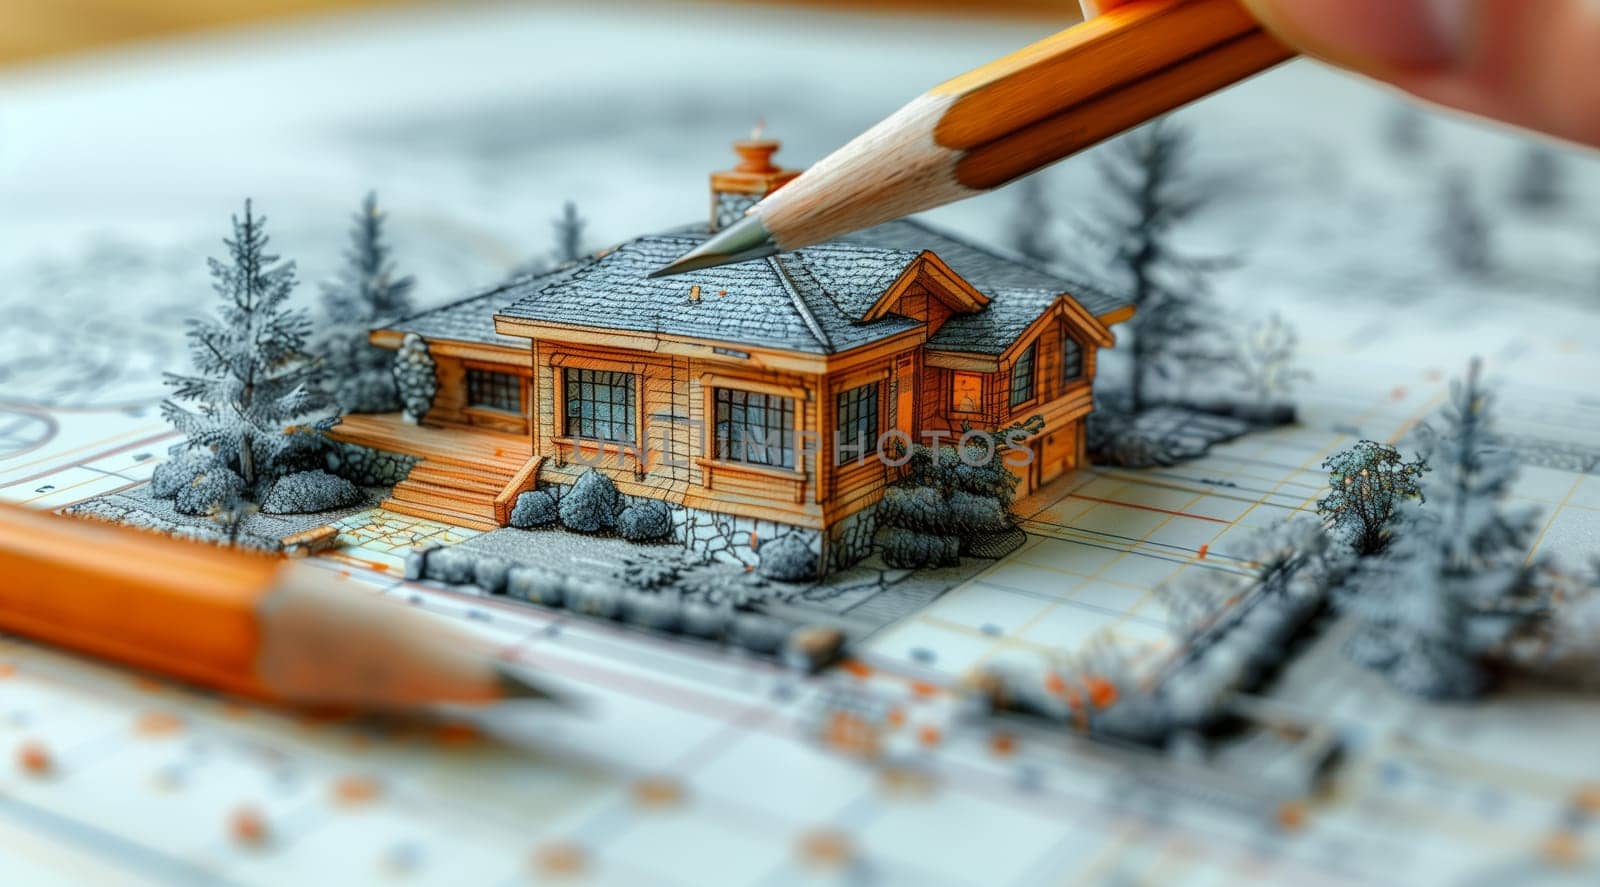 The person is using pencils to draw a model house with details like wood, plants, and vehicles. Their fingers carefully sketch the watercraft and asphalt, adding artistic touches with every stroke